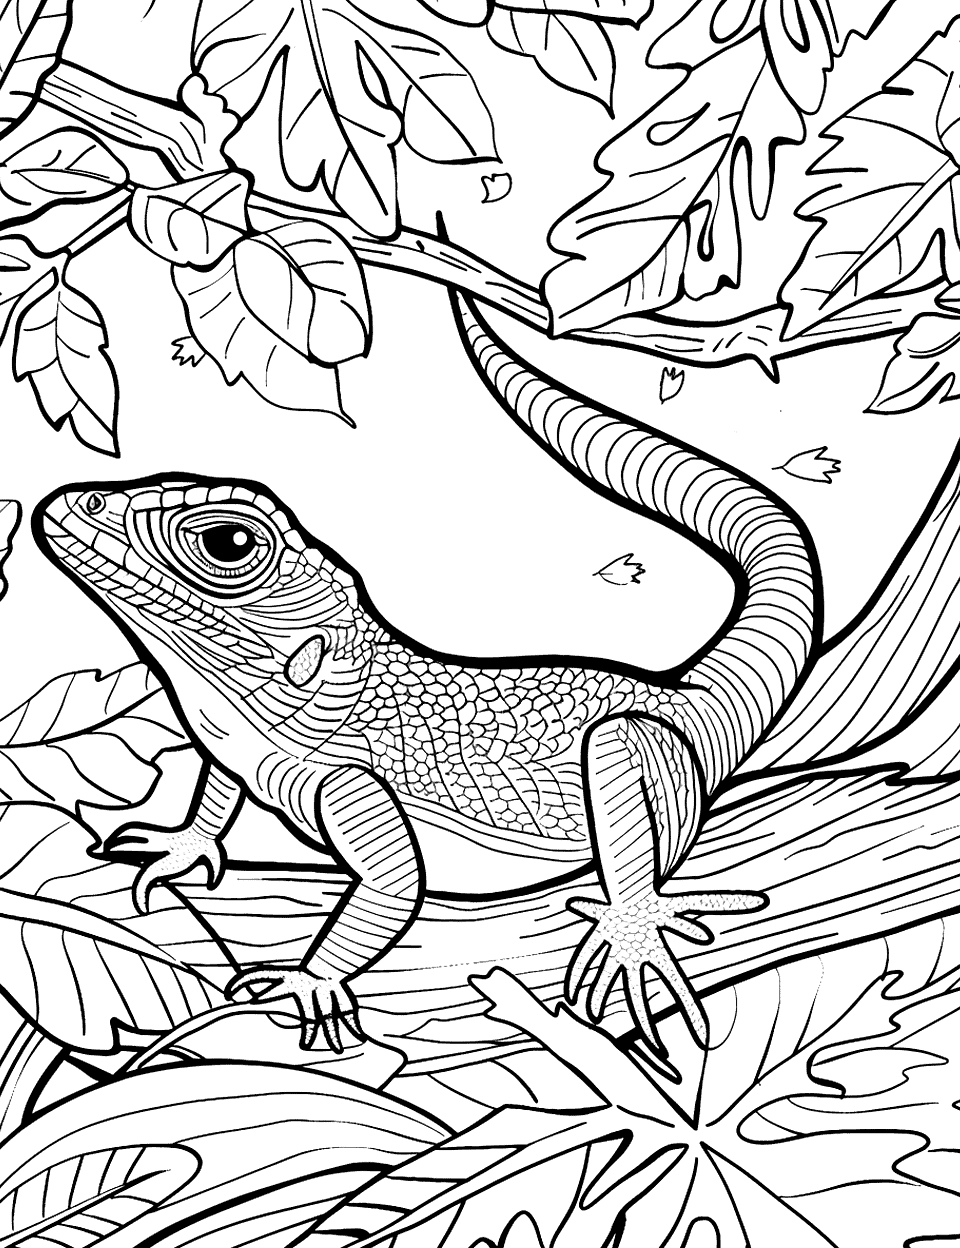 Anole During Autumn Lizard Coloring Page - An anole amidst autumn leaves, with a gentle fall breeze moving the leaves.